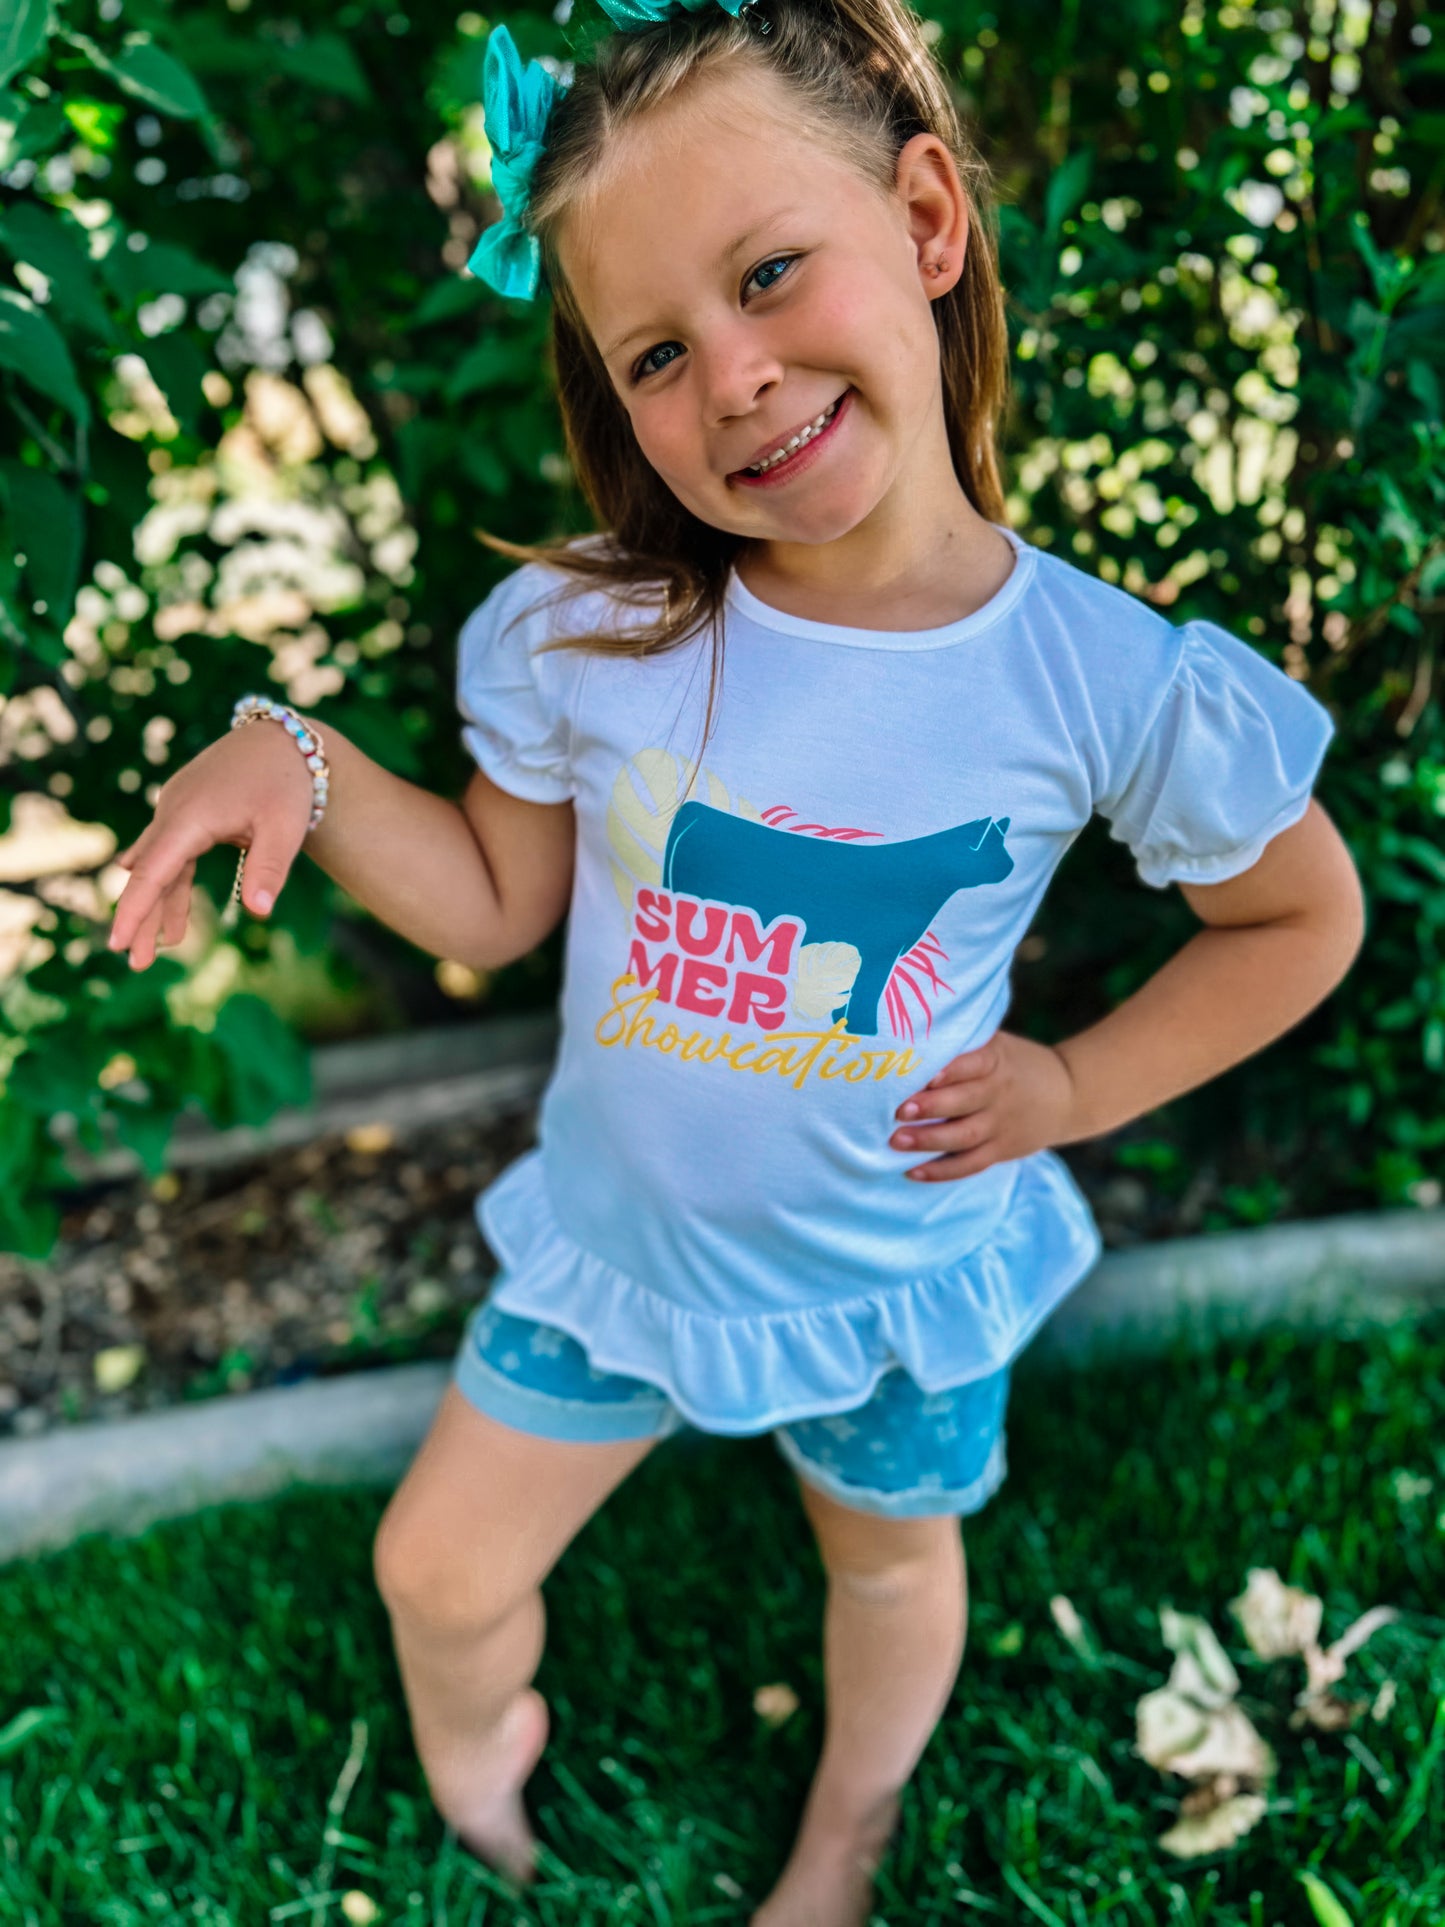 the Summer |Showcation| tank or tee {kids}